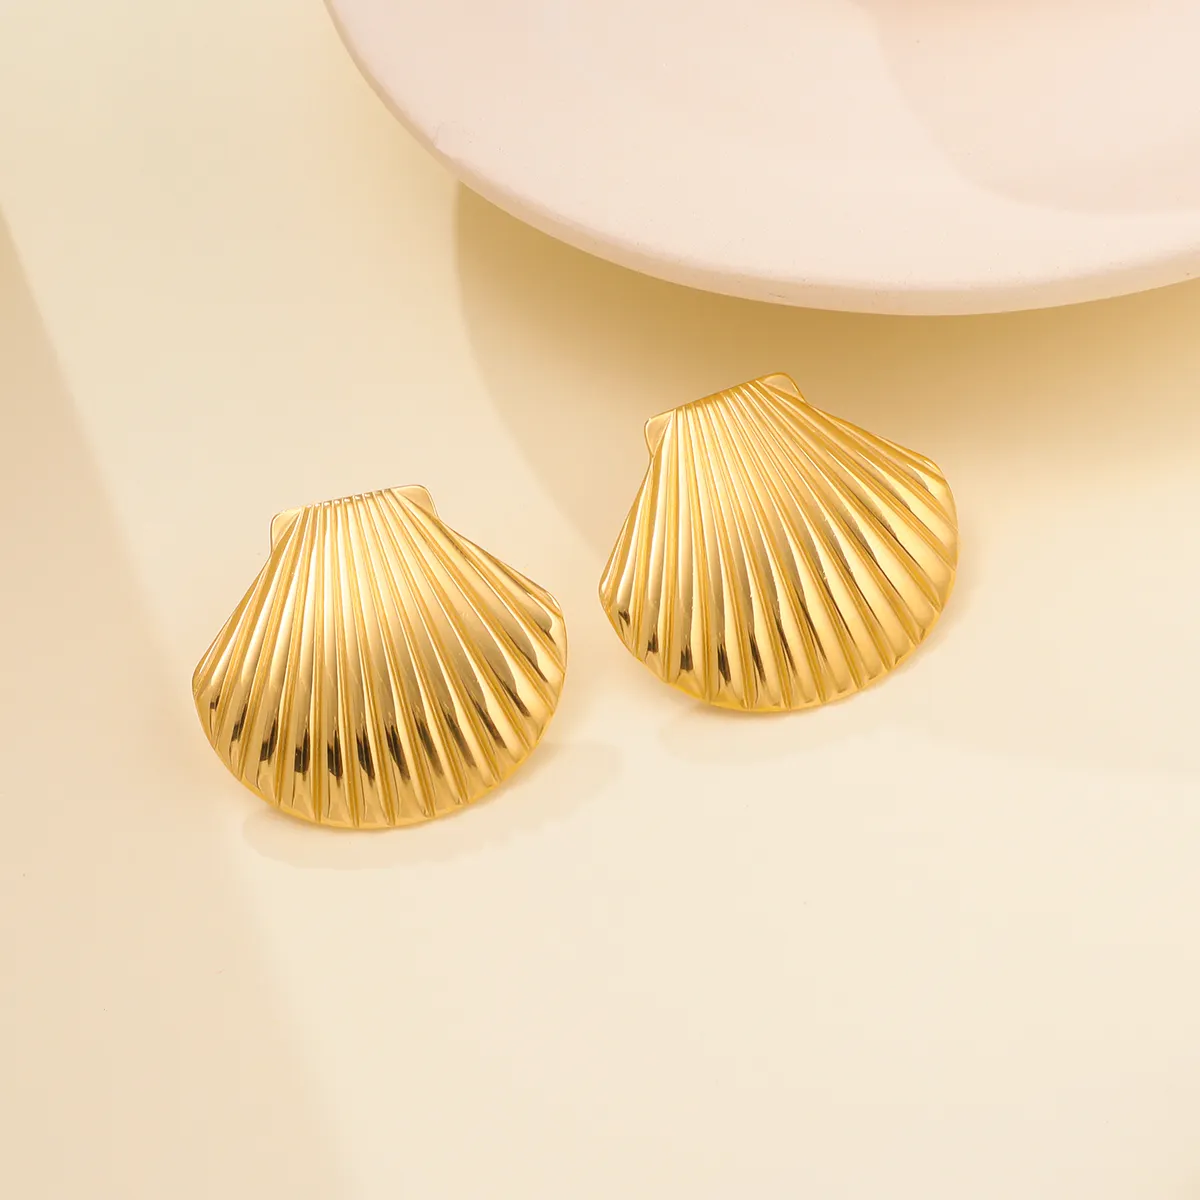 Fashion Shell Scallop Stud Earring Tarnish Free 18K Gold Plated Stainless Steel Texture Earrings Women Hypoallergenic Jewelry